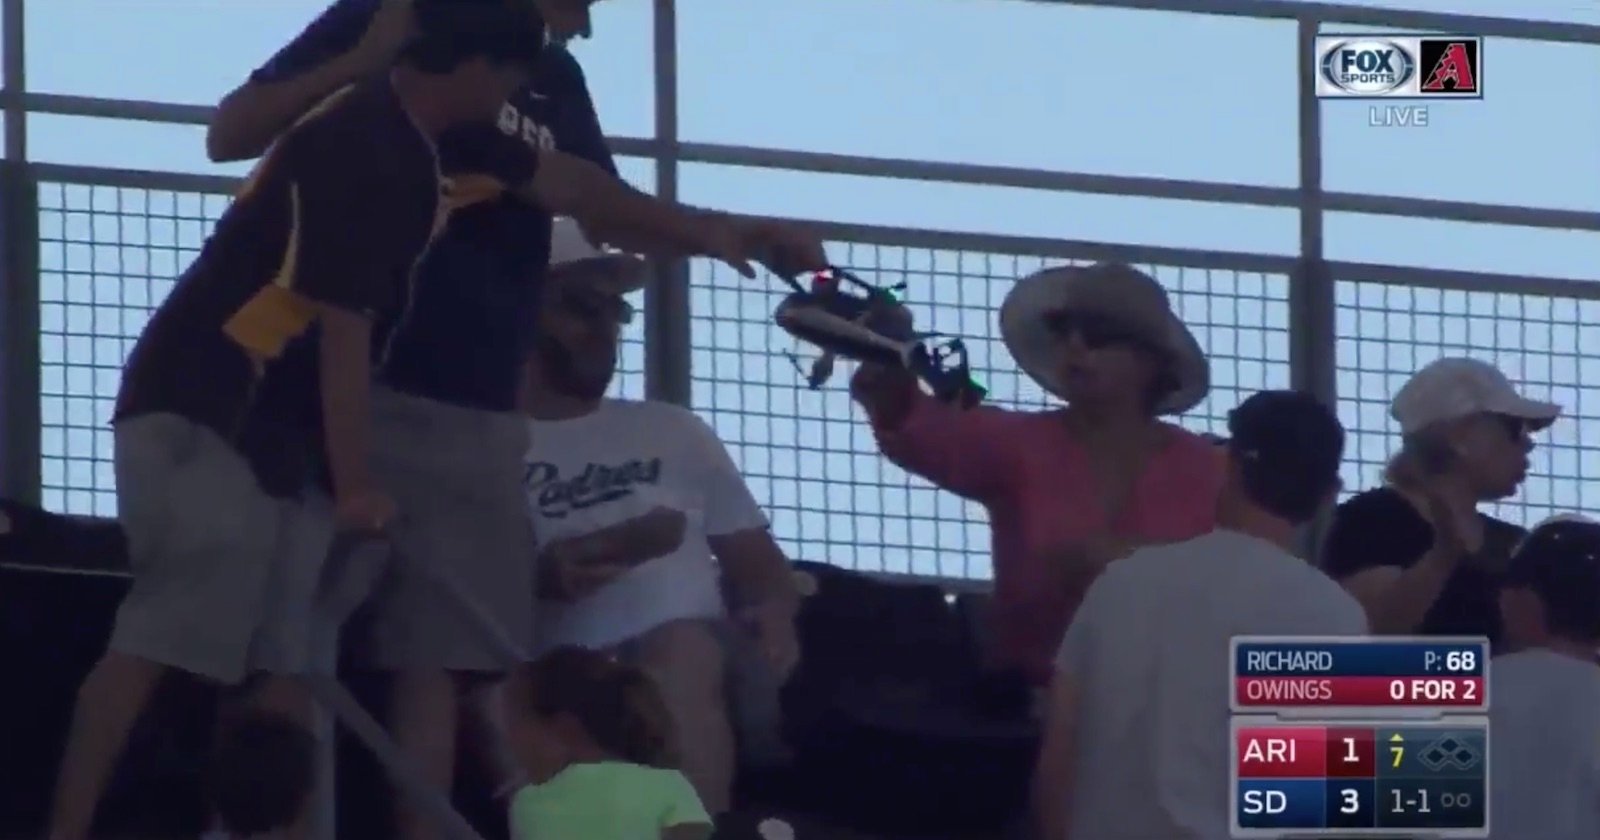 Illegal Drone Slams Into the Stands at Baseball Game, Narrowly Missing Fans